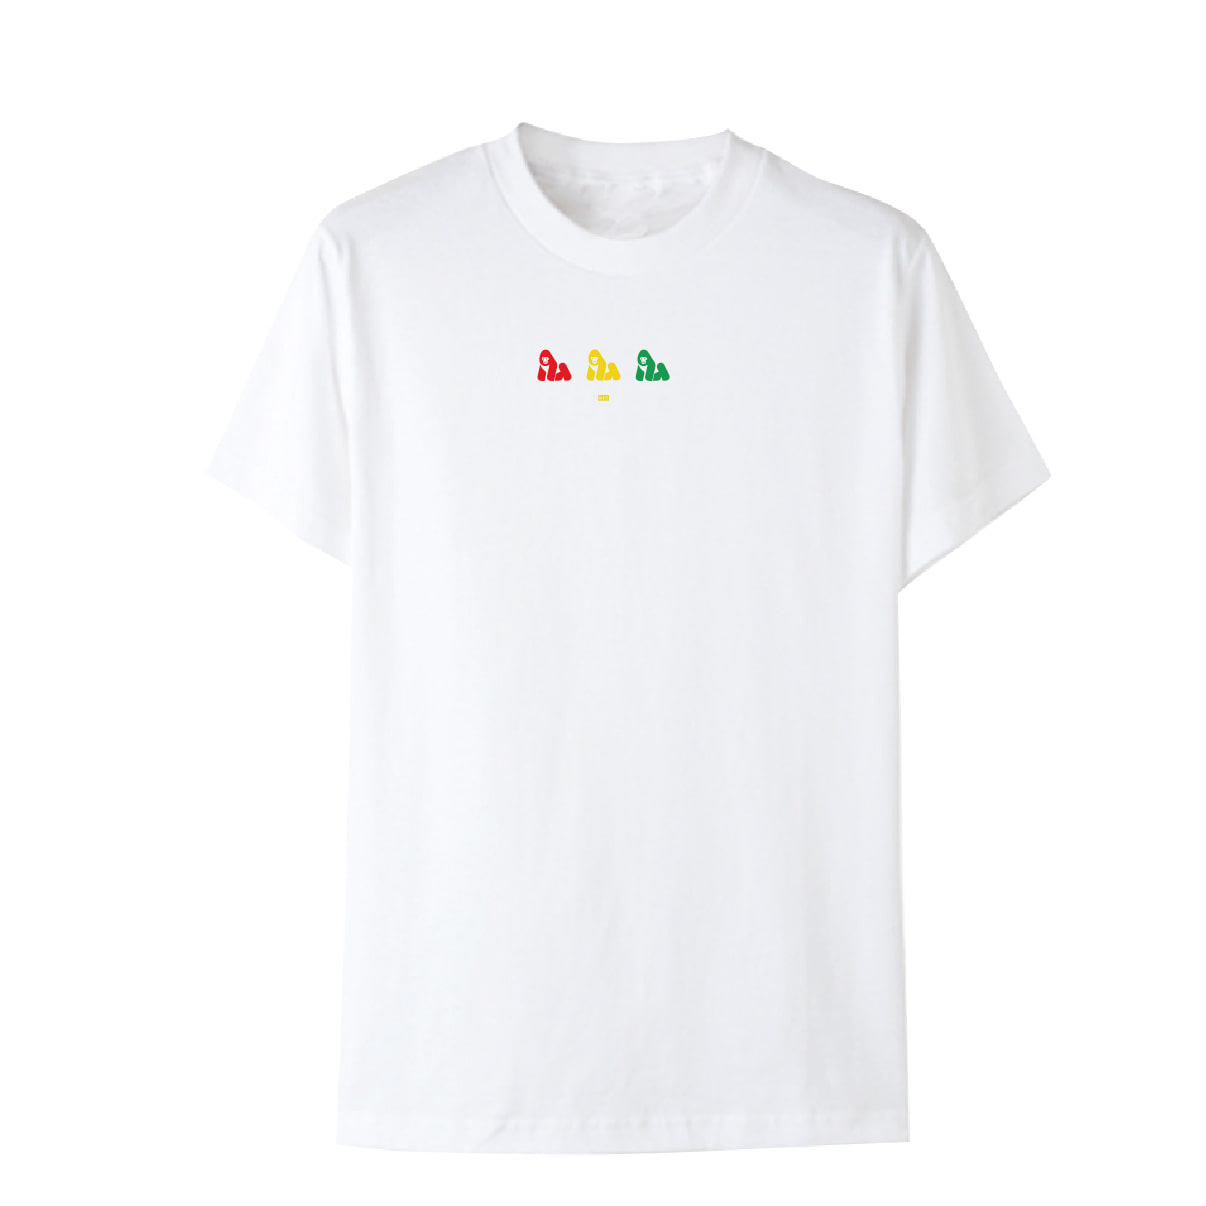 Kismos YouTuber Ma Sunho Goods - Short-sleeved T-shirts for men and women (Sales period: July 5-July 9)